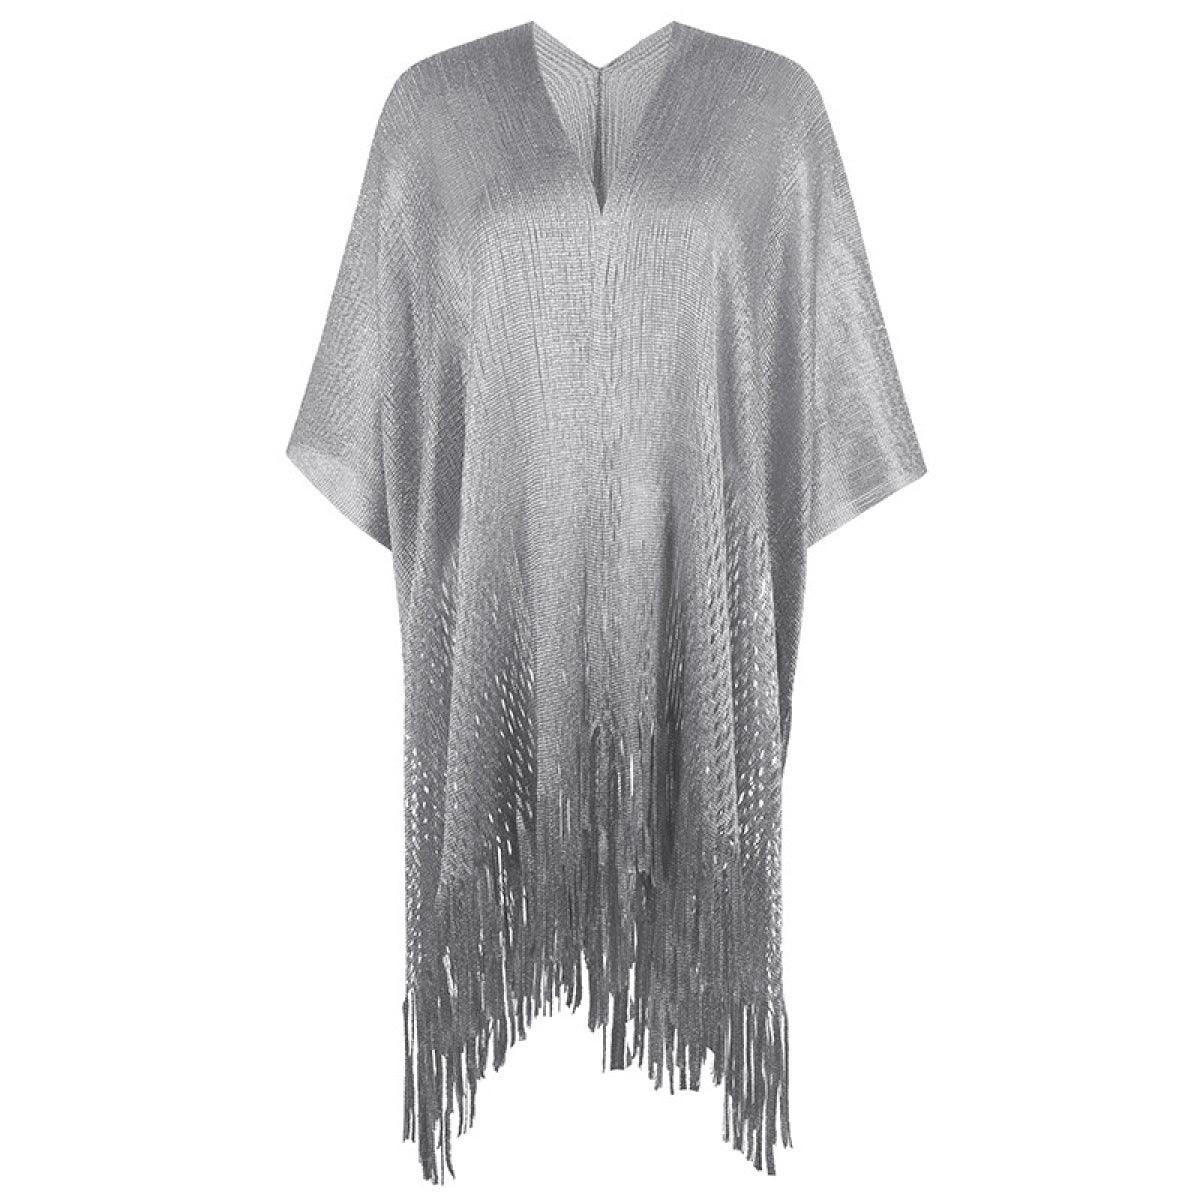 Chic & Stylish: Must-Have Kimono Fringe Cut Out Shawl for Summer